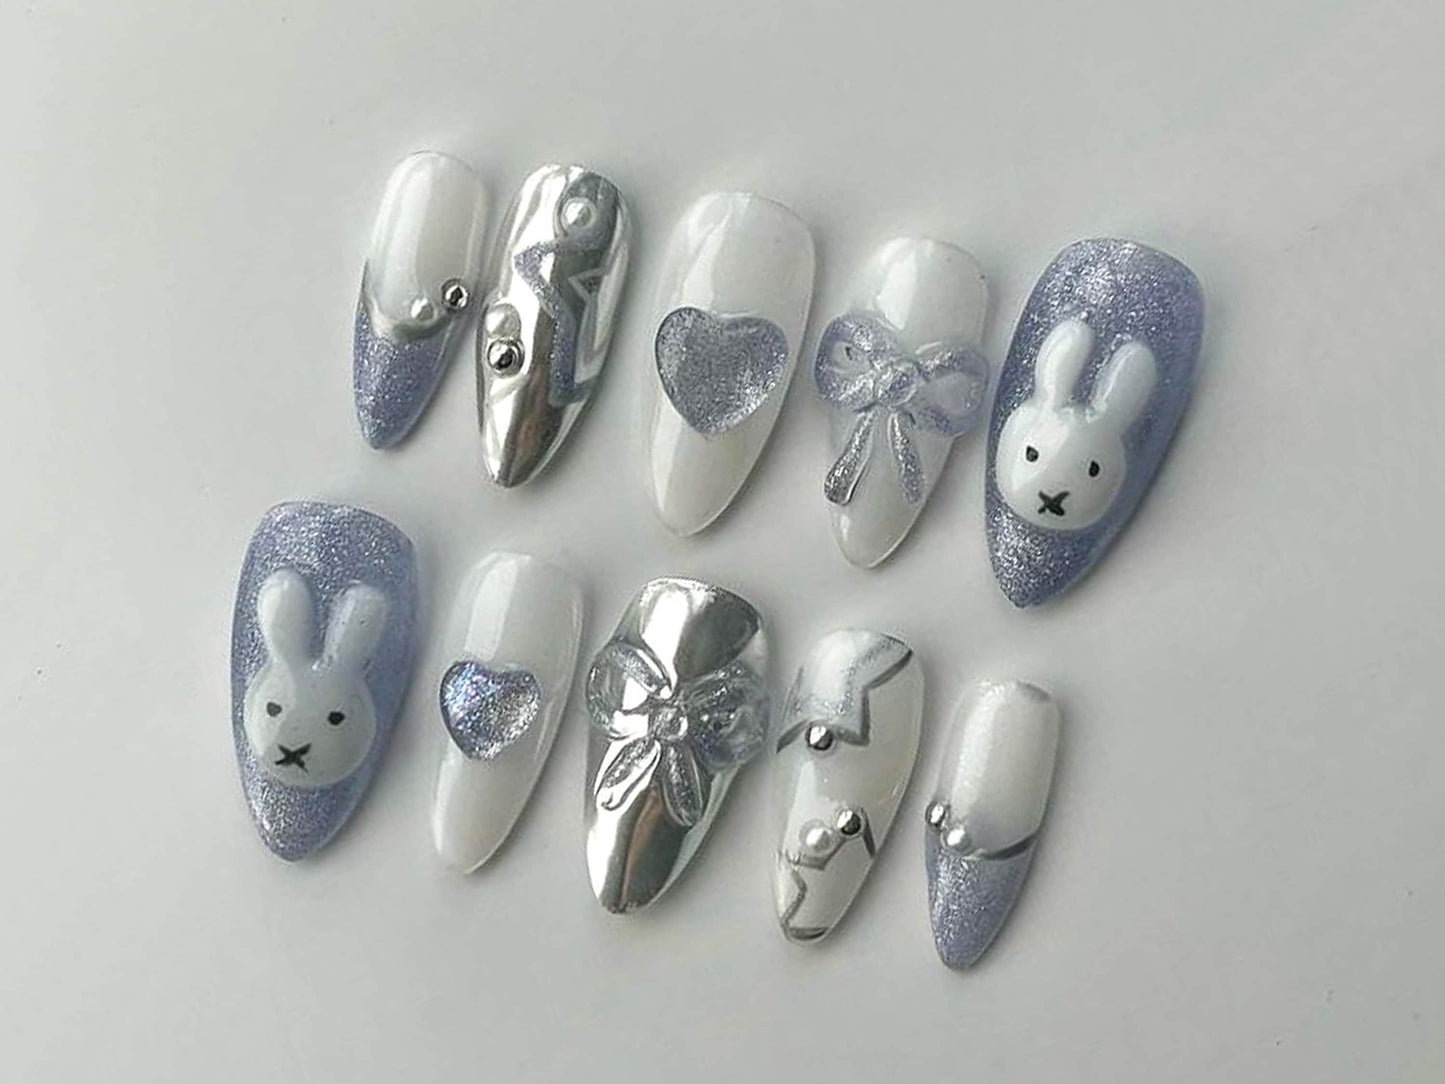 Cute Blue Bunny Press On Nails | Bunnie Designs in Fake Nails | Custom Handpainting 3D Silver Bow with Heart Chrome | Kawaii Nails | J110